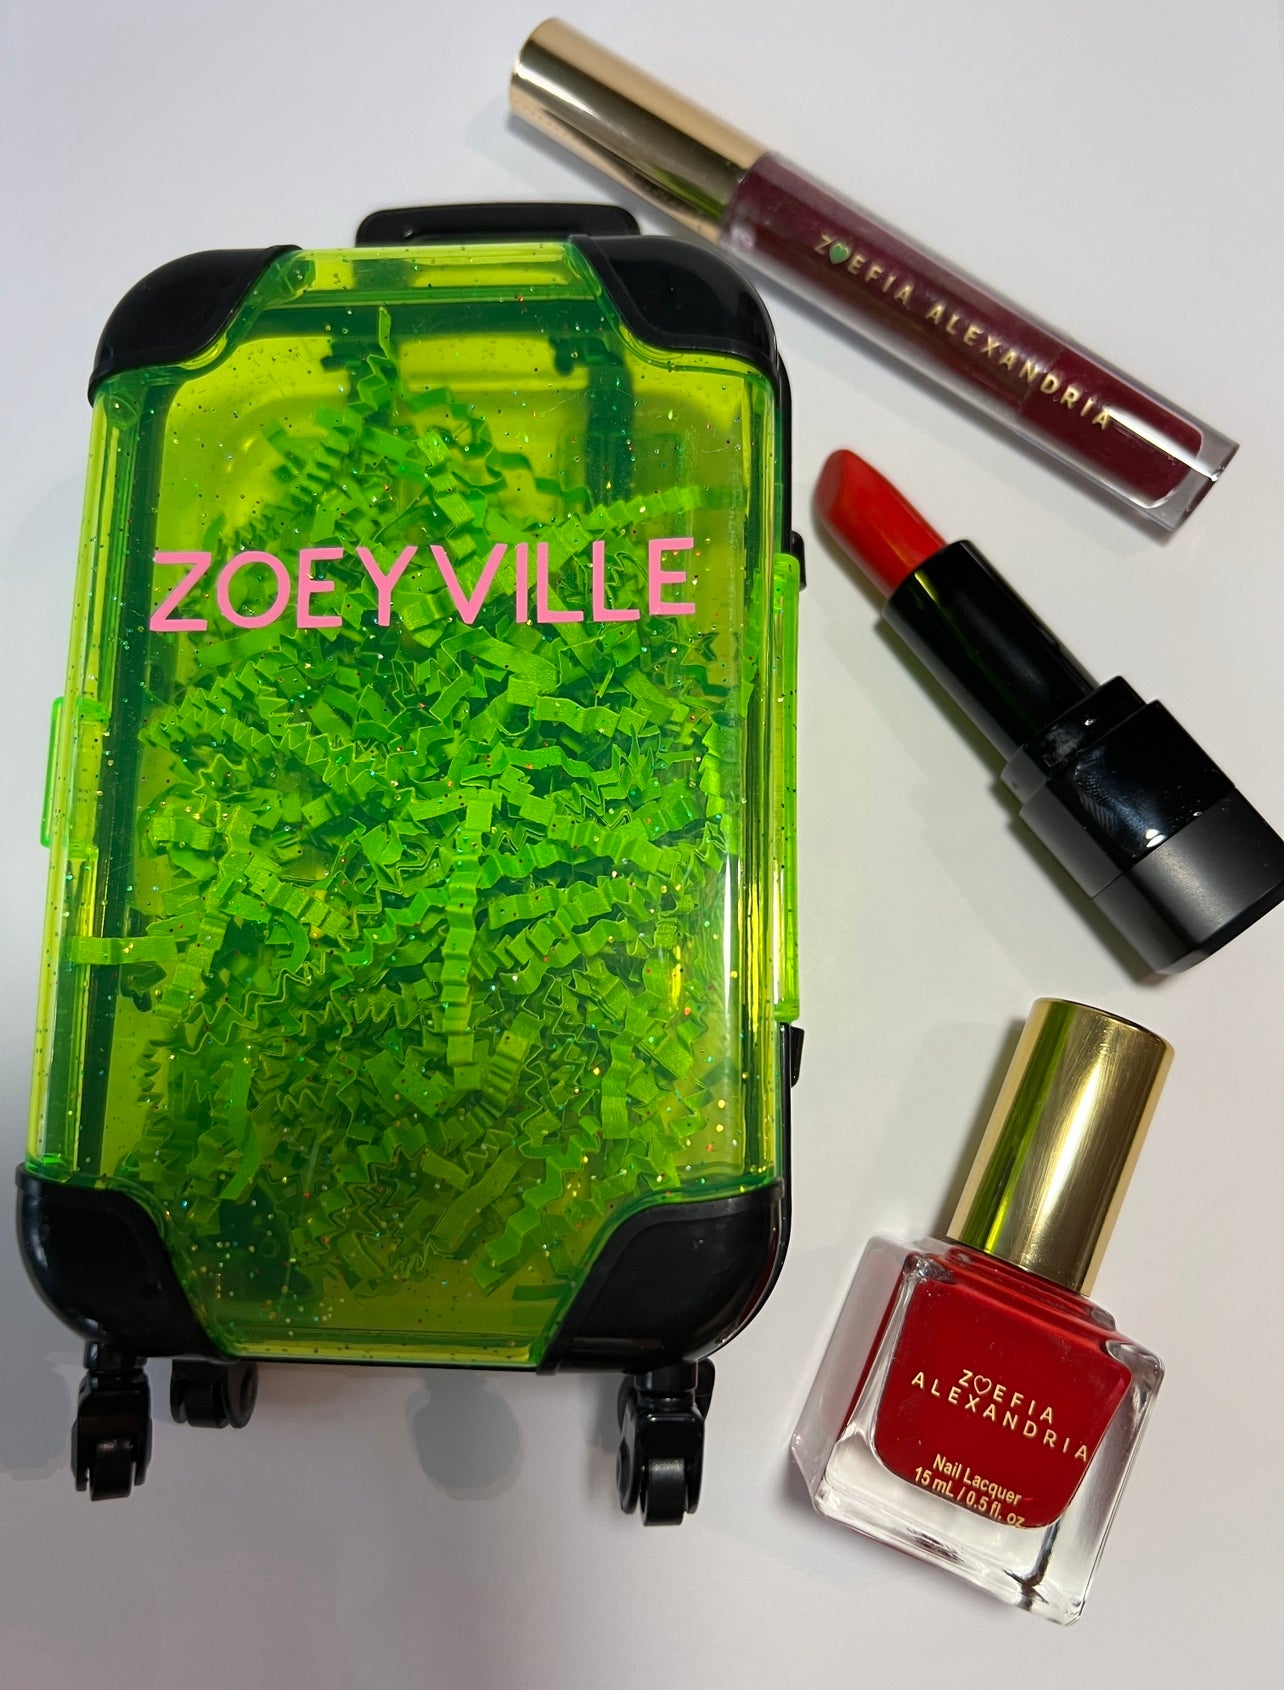 3 Piece Holiday Kit - Pack your own Zoeyville Luggage!